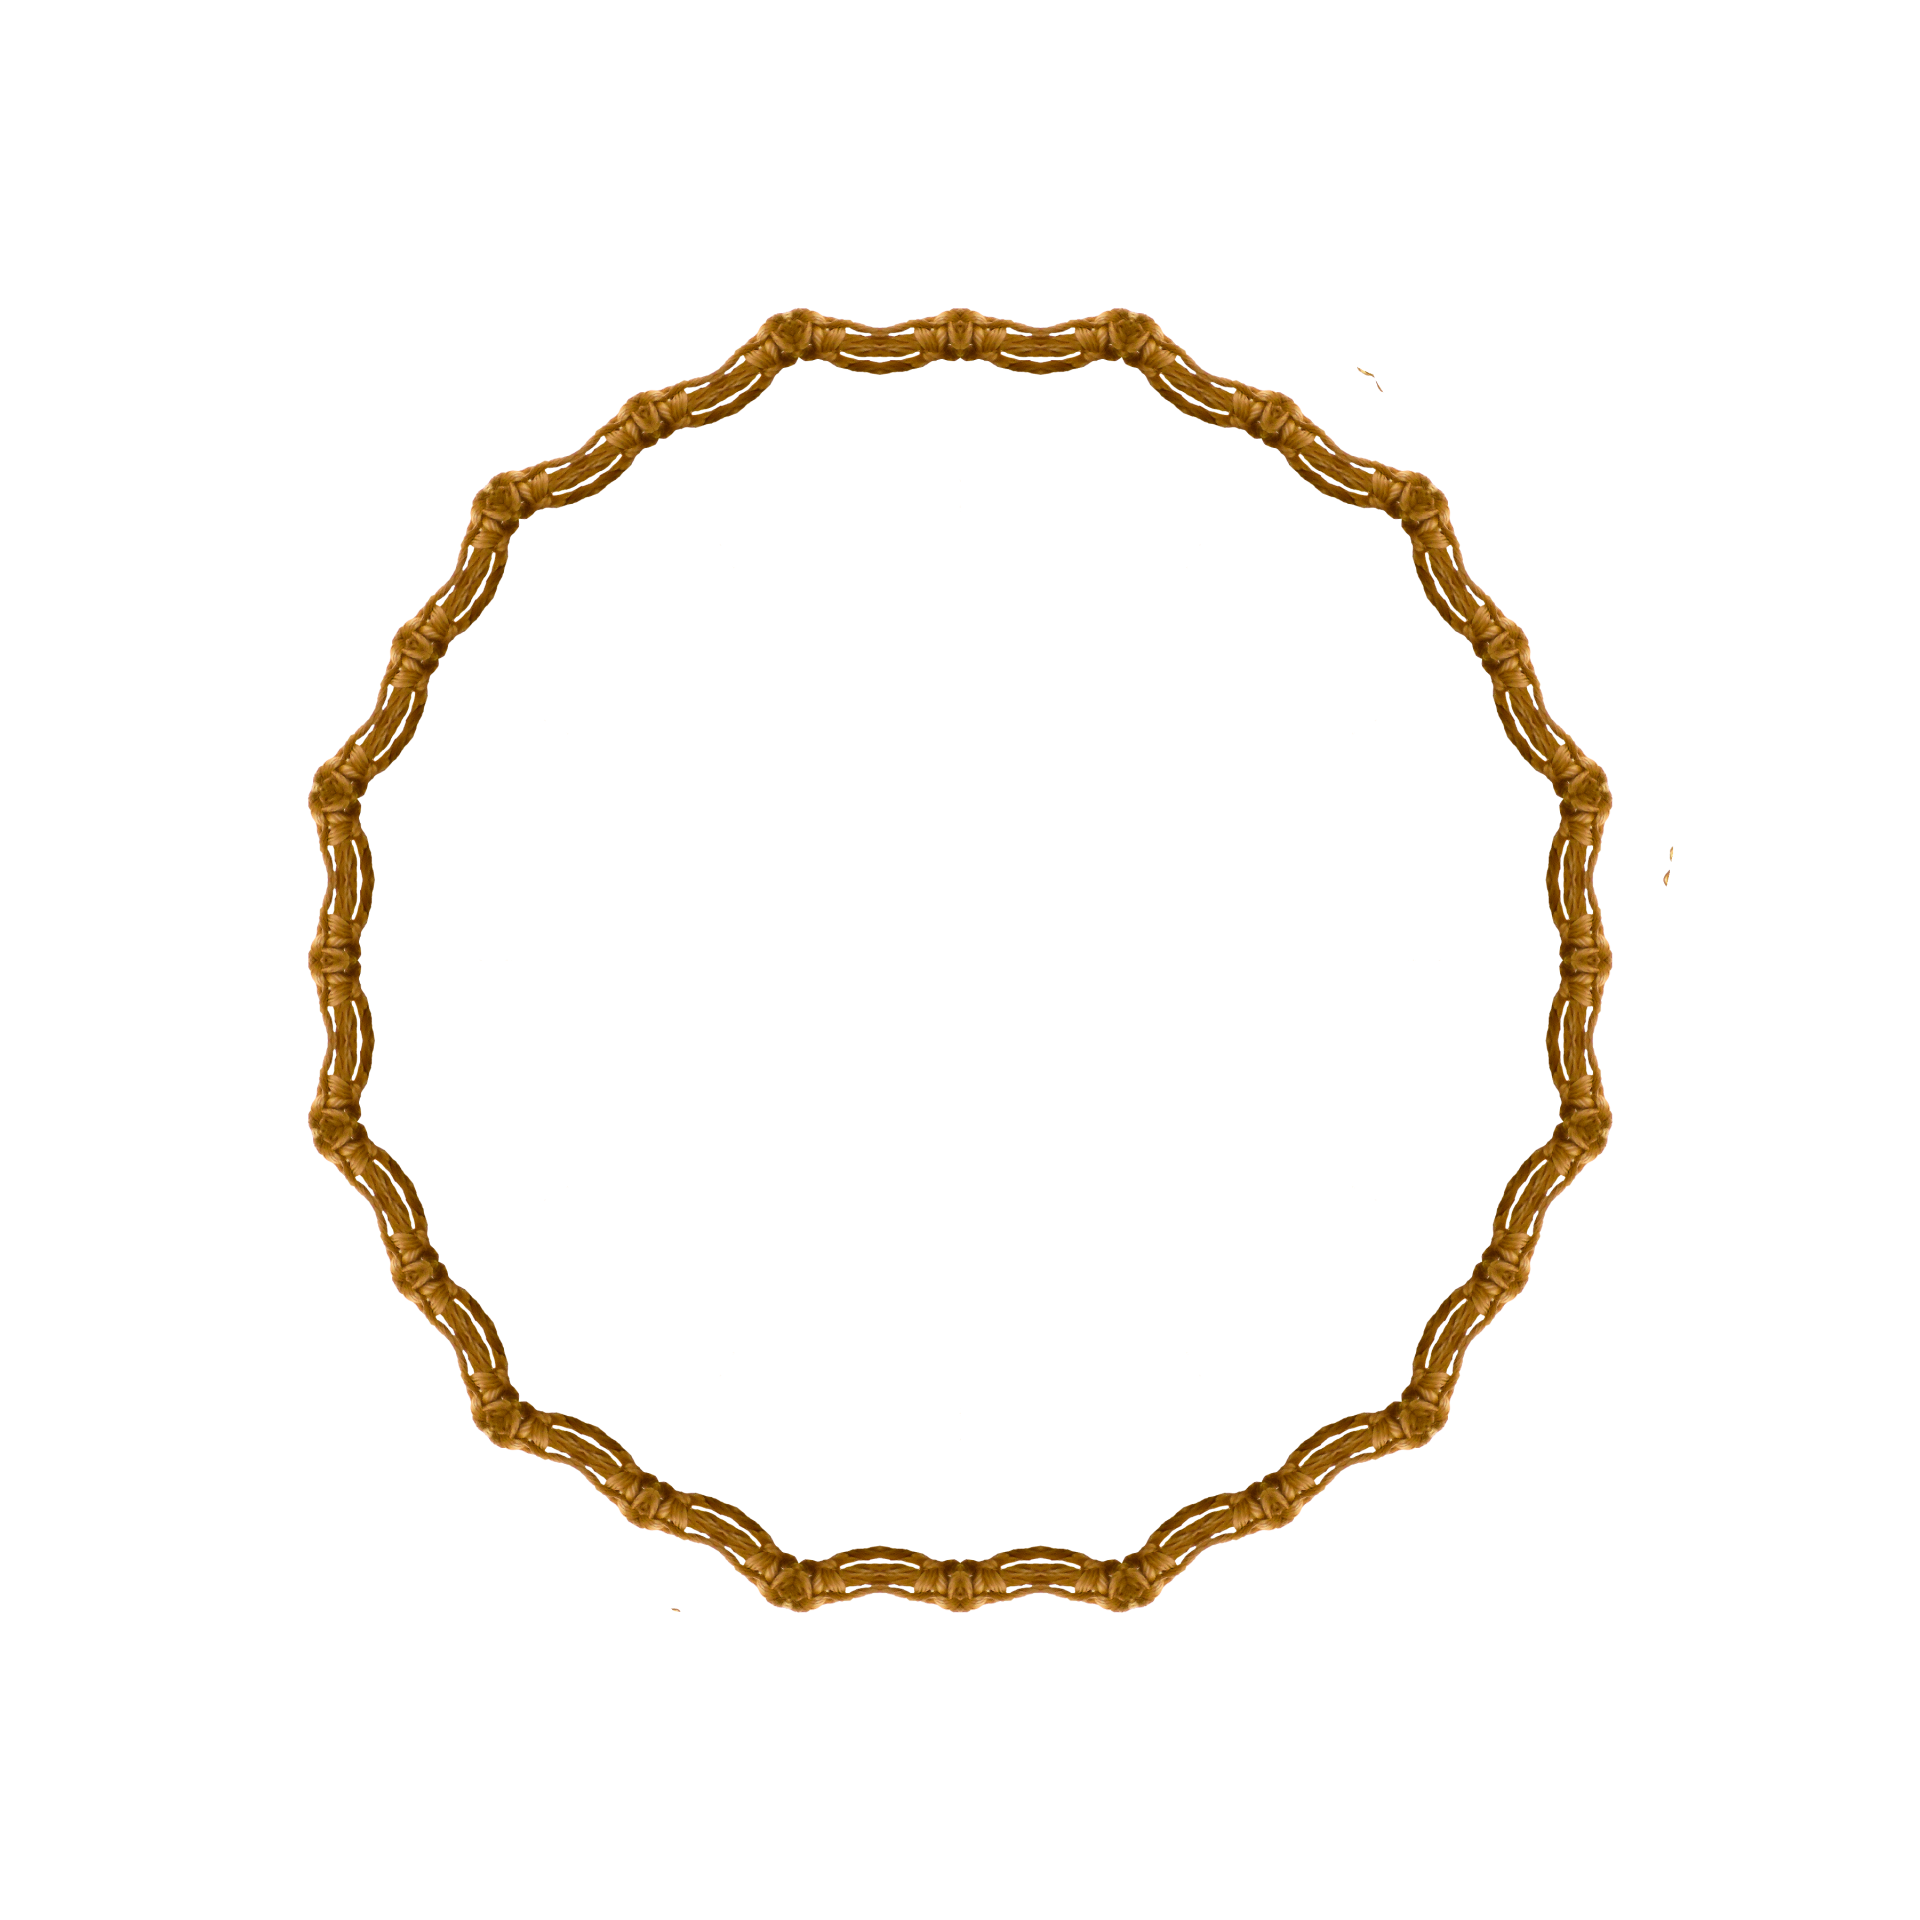 Knotted Cord Circle Frame